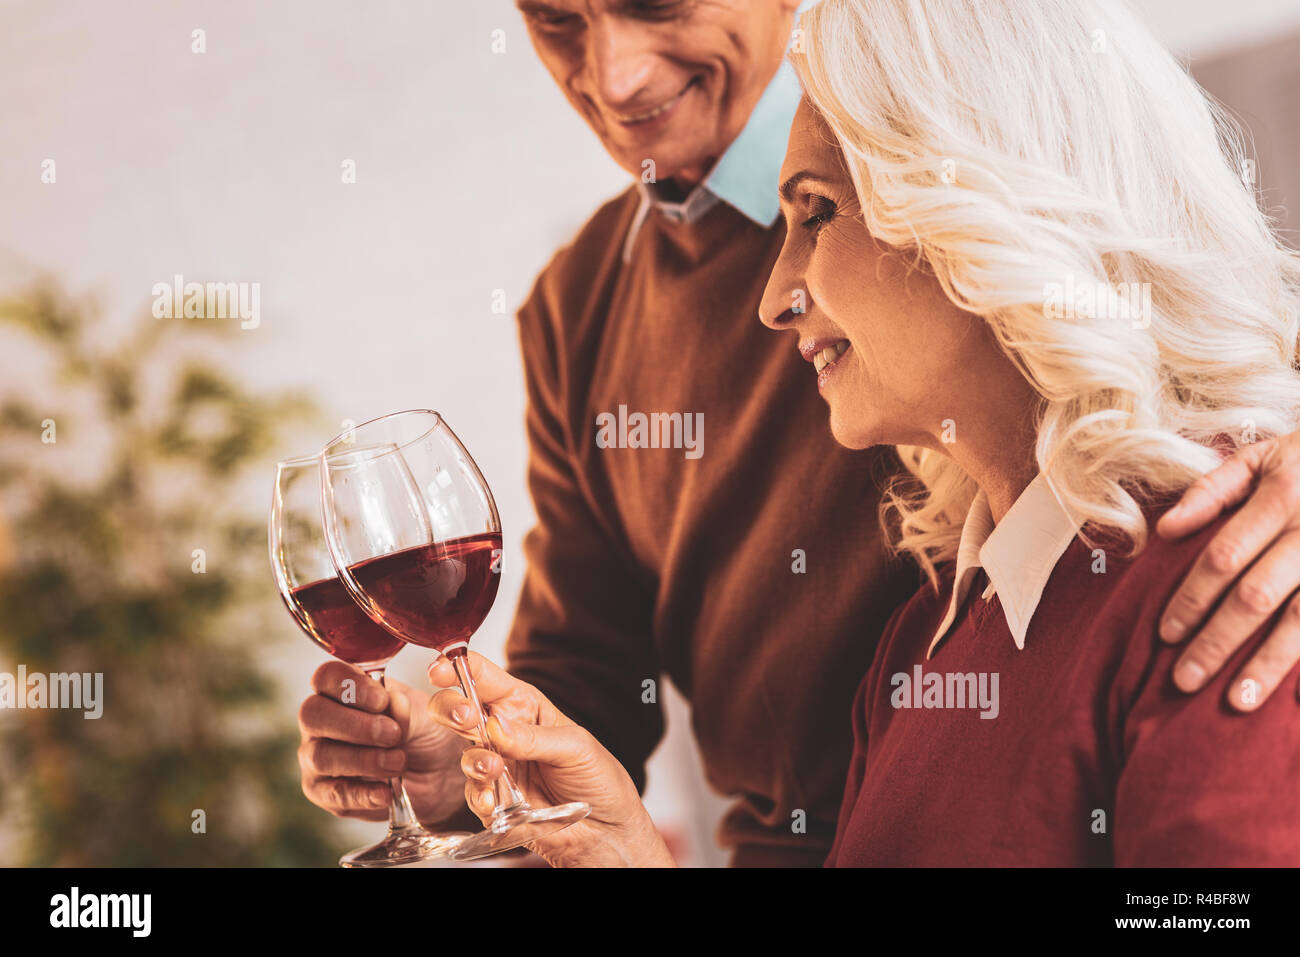 Wine evening. Couple of happy aged people feeling unforgettable while enjoying nice wine evening together Stock Photo